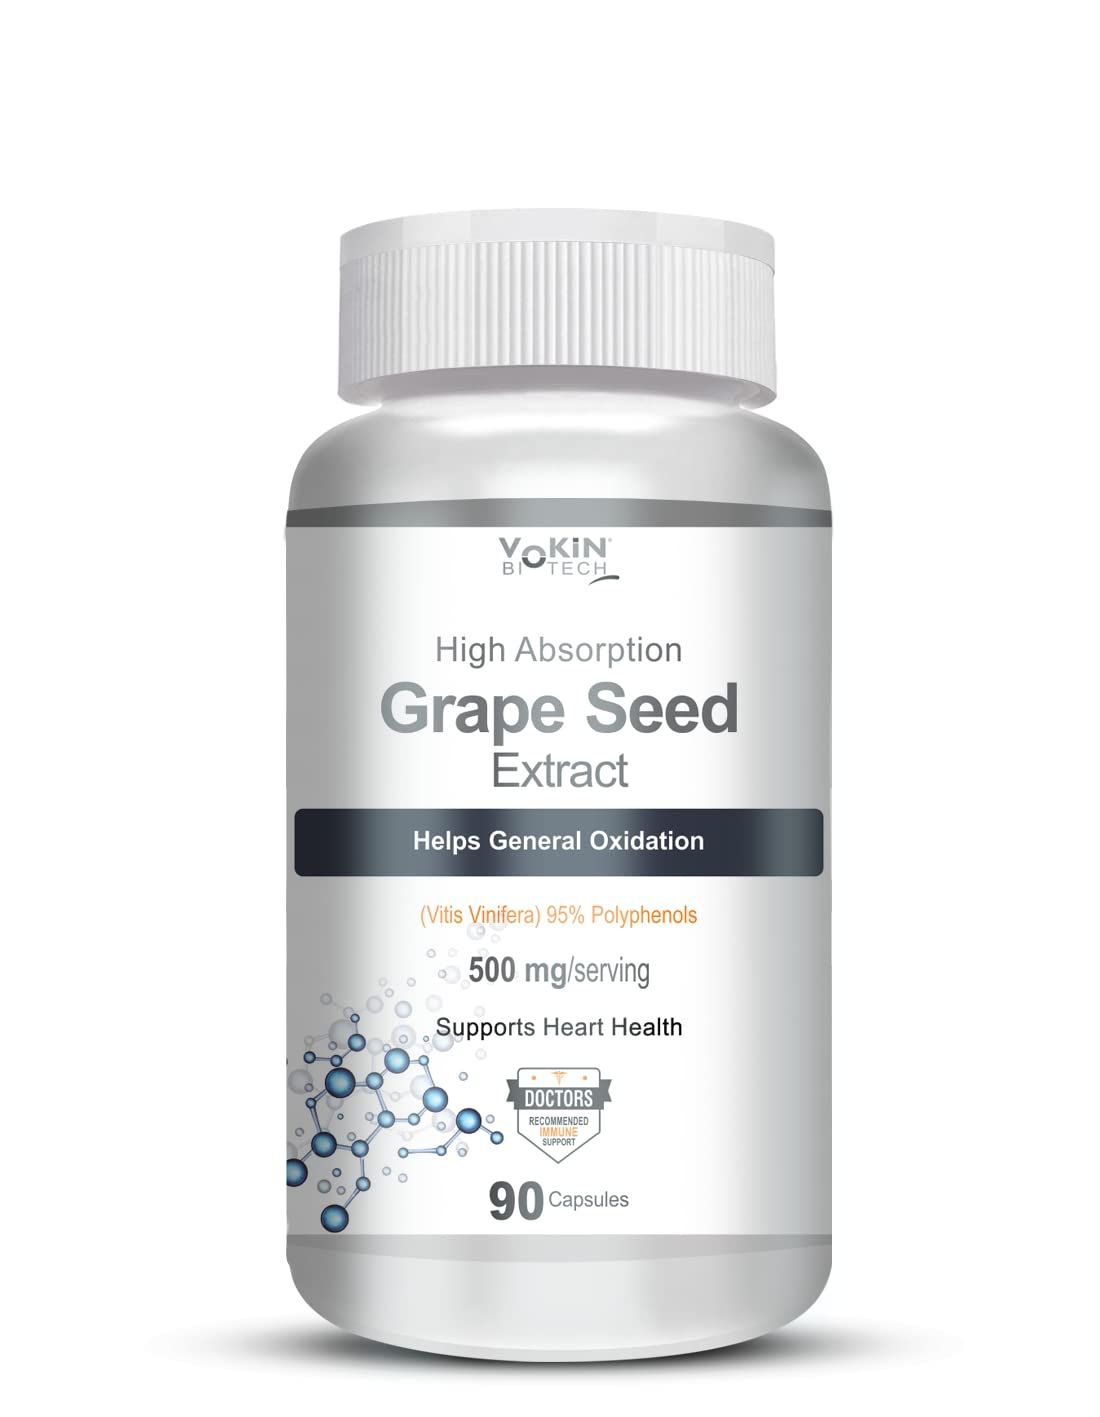 Vokin Biotech Grape Seed Extract Image